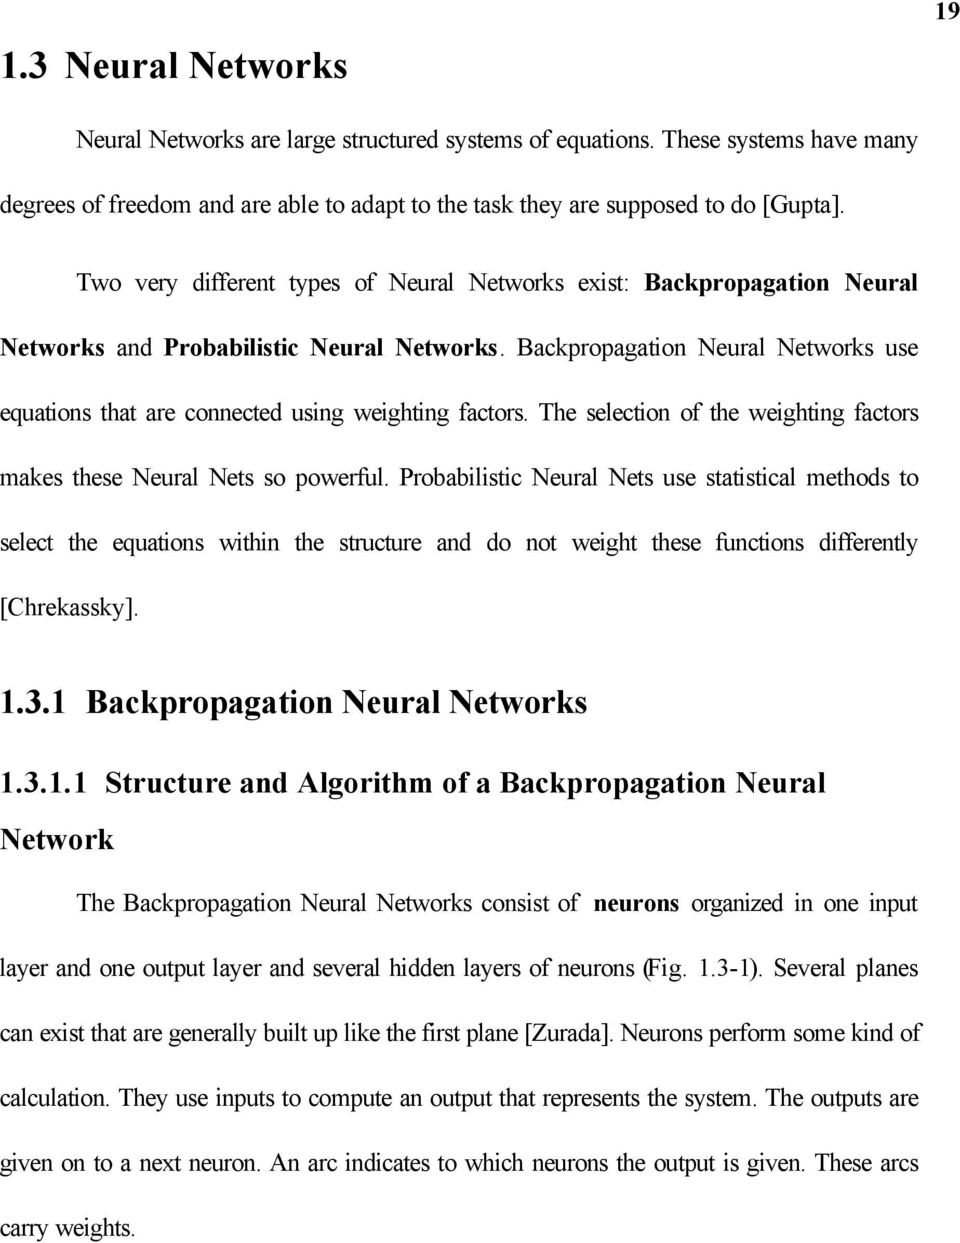 ackpropagation Neural Networks use equations that are connected using weighting factors. The selection of the weighting factors makes these Neural Nets so powerful.